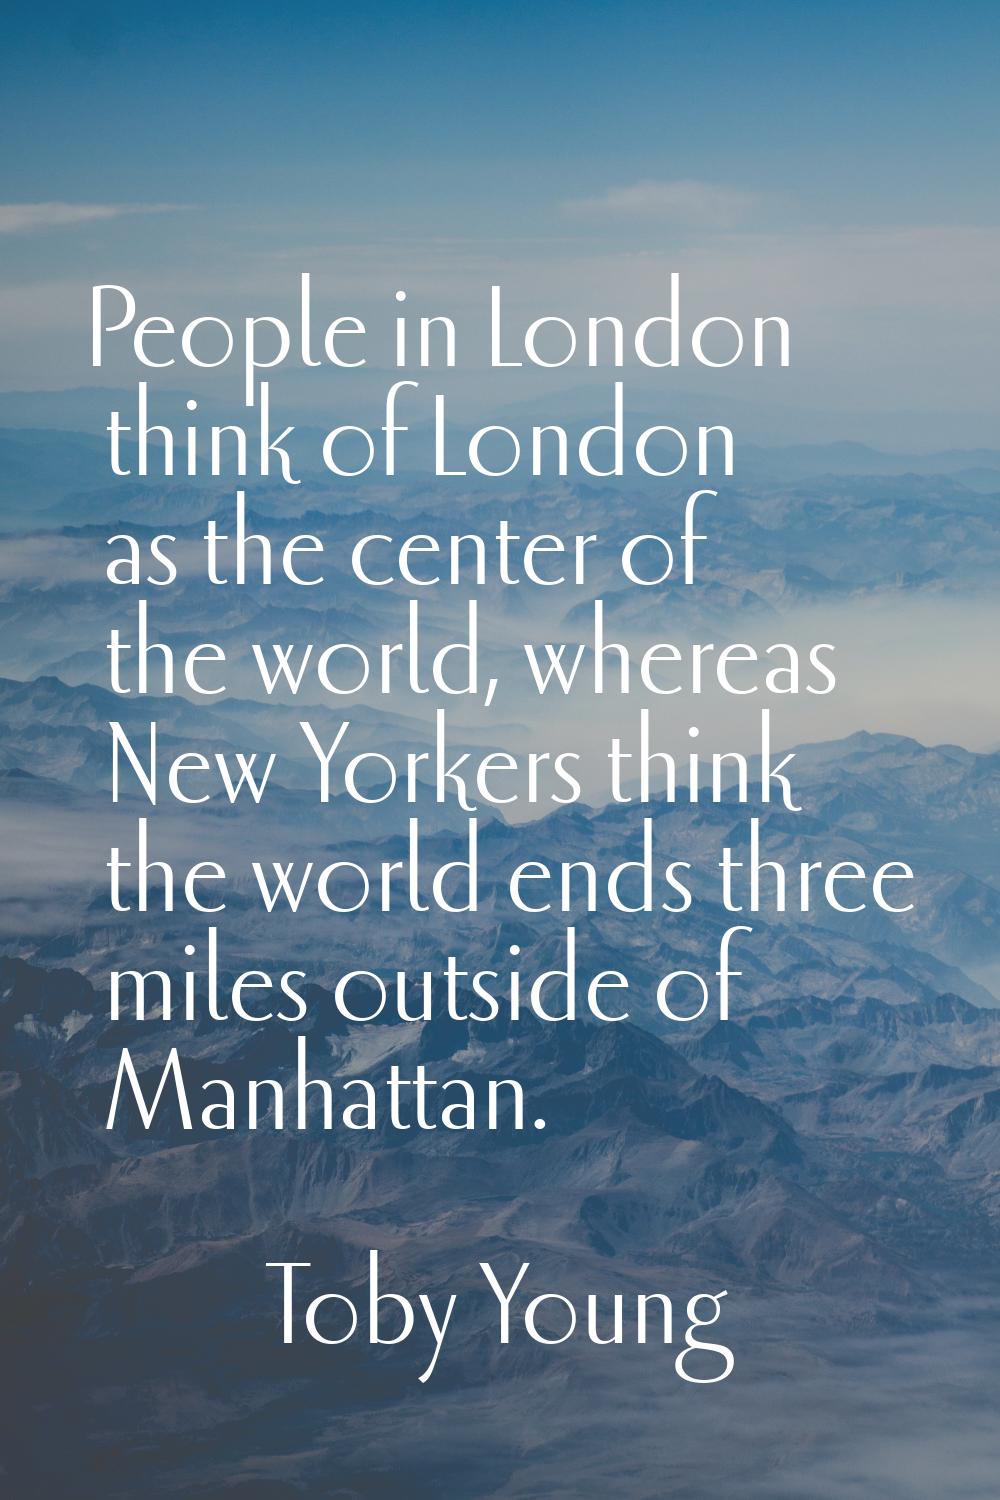 People in London think of London as the center of the world, whereas New Yorkers think the world en